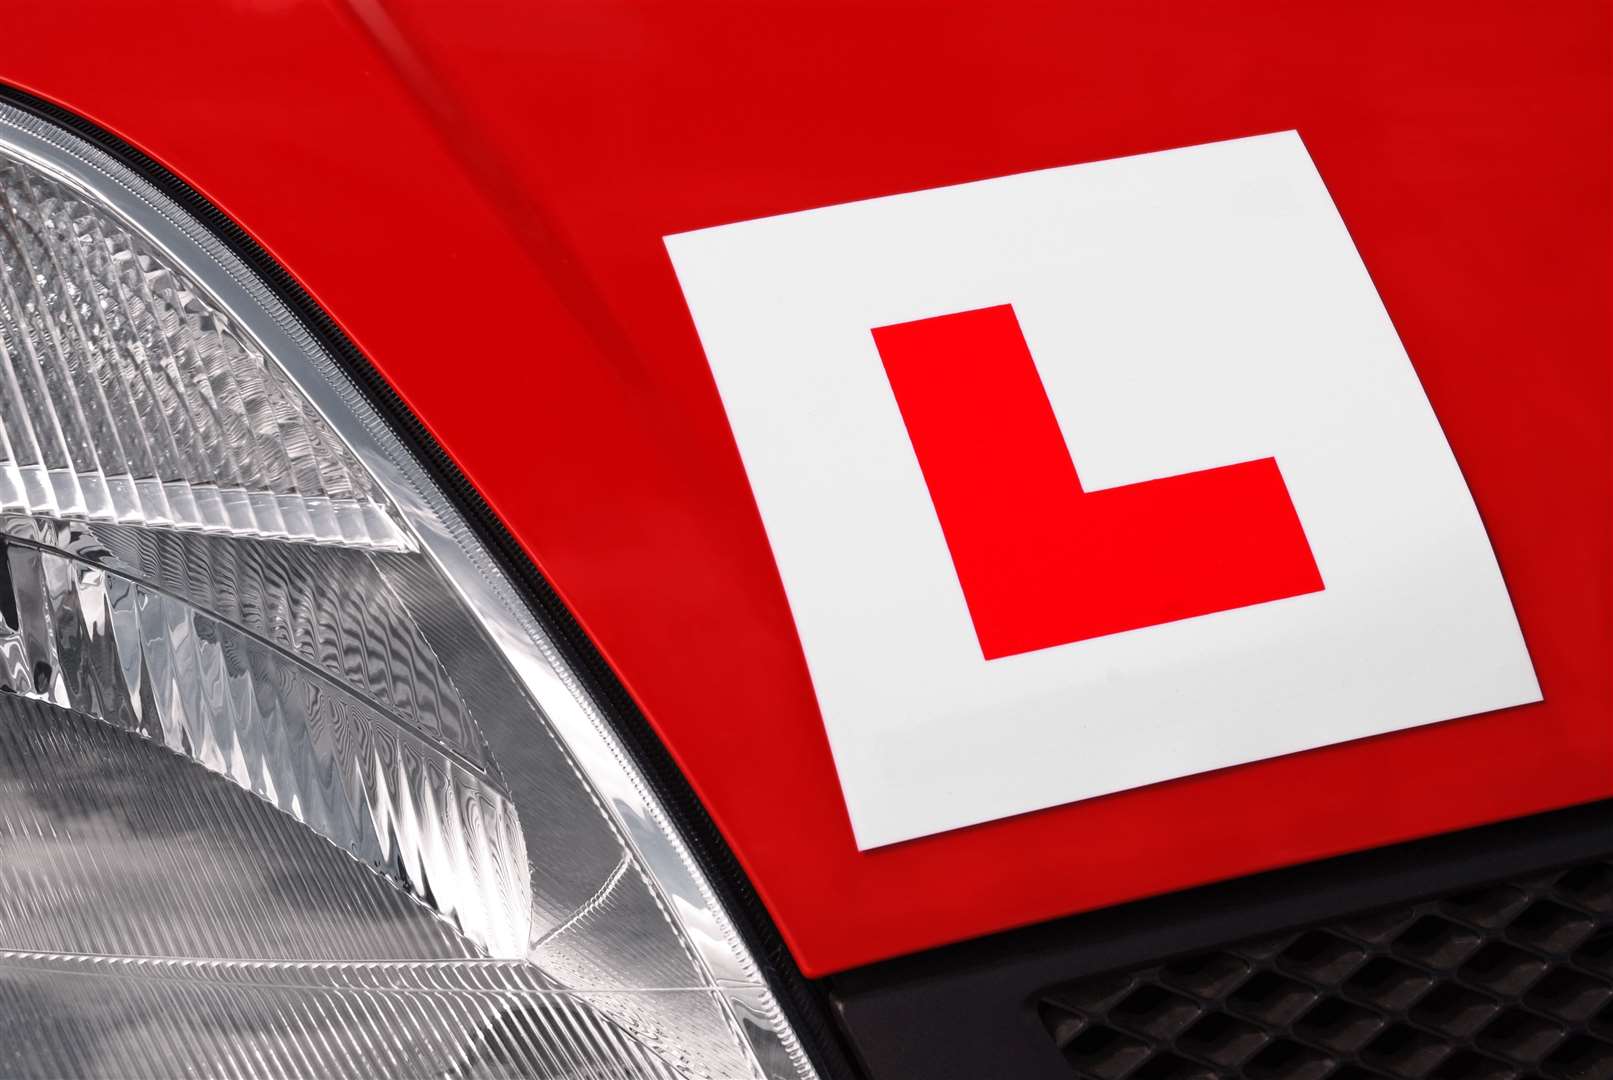 Driving lessons and tests could resume at the end of April.